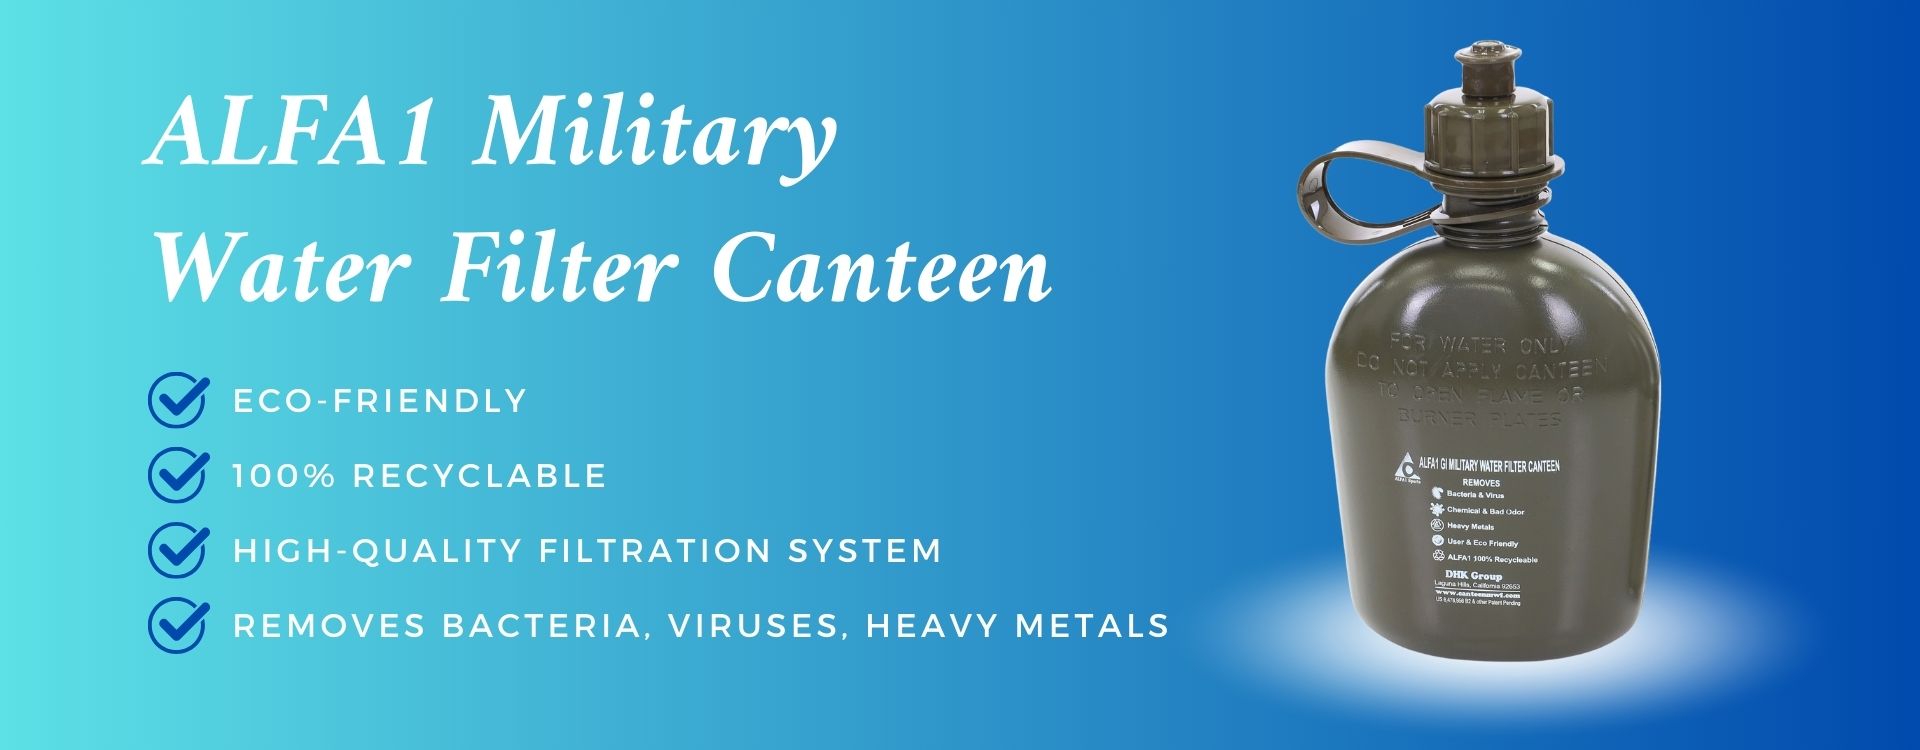 ALFA1 Military Water Filter Canteen Banner